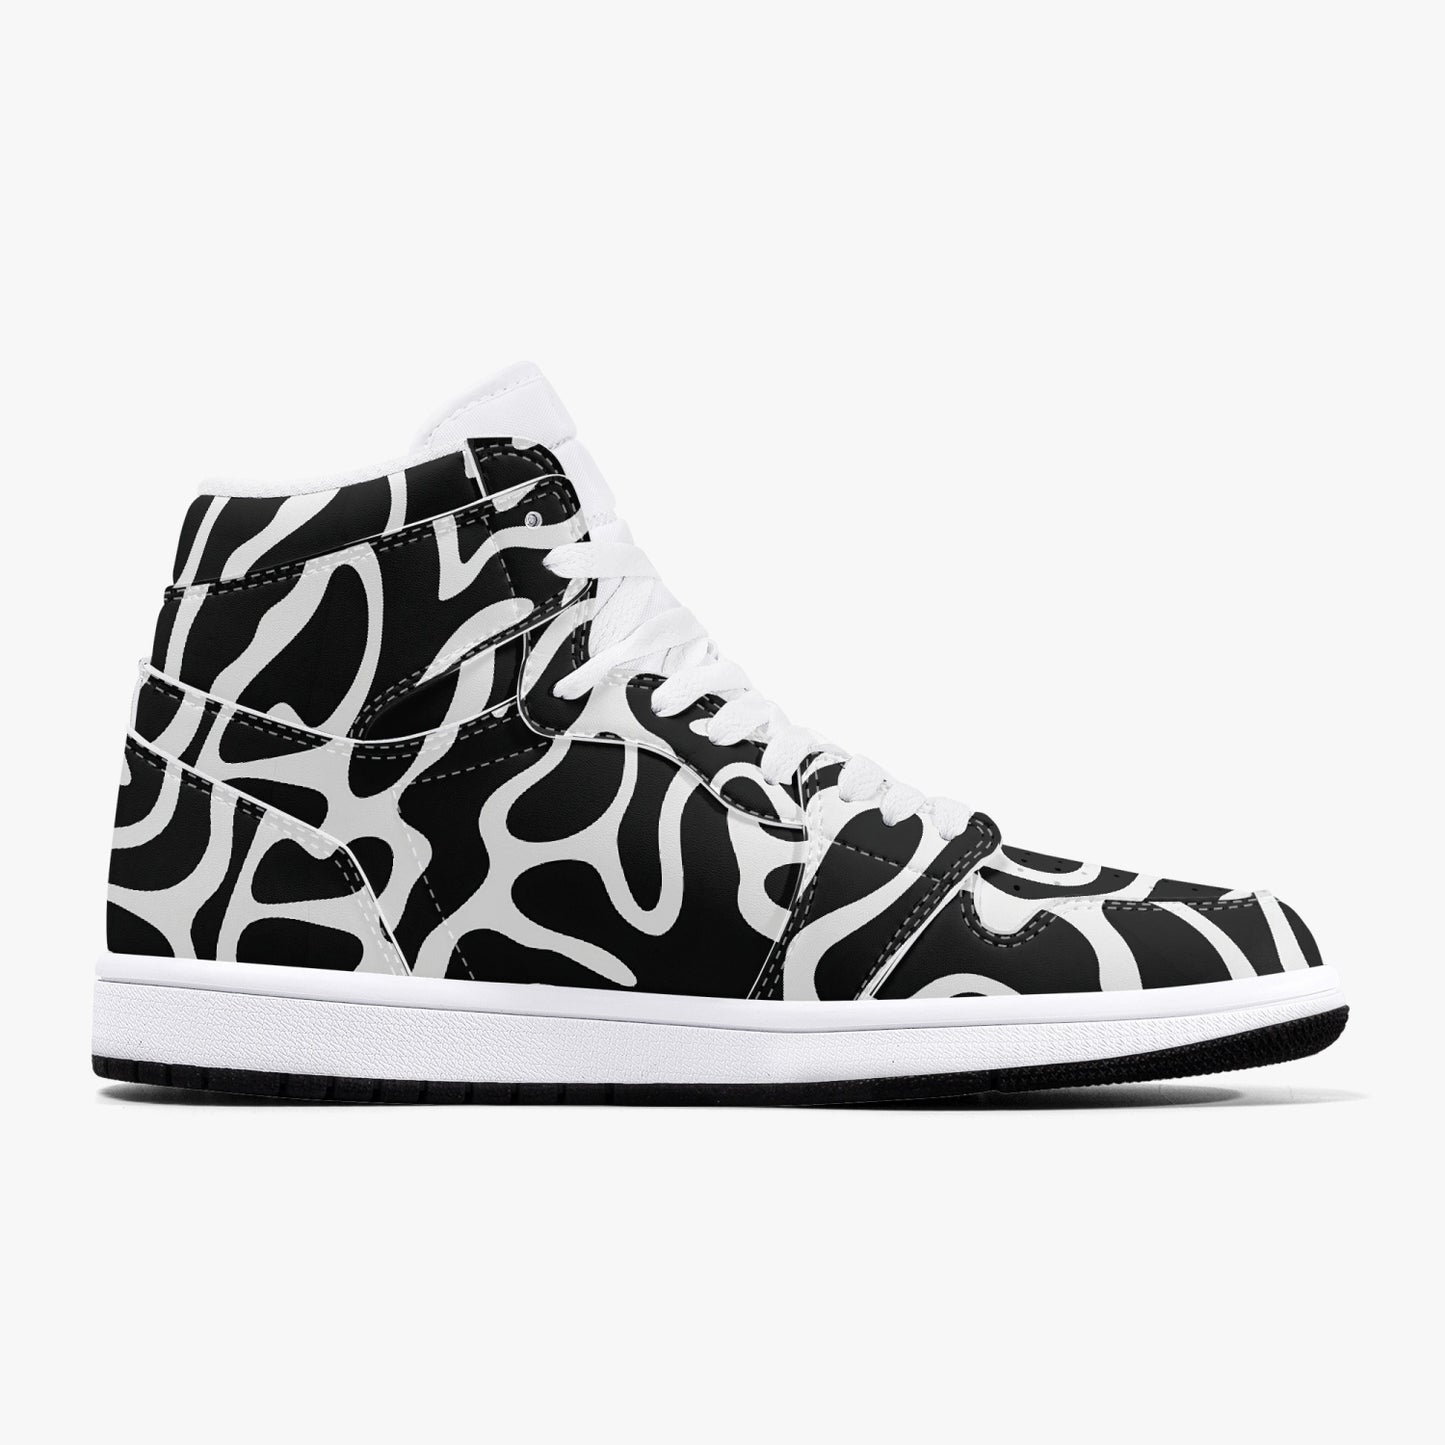 Black White High Top Leather Shoes Sneakers, Men Women Abstract Animal Print Lace Up Footwear Rave Streetwear Designer Gift Kids Starcove Fashion